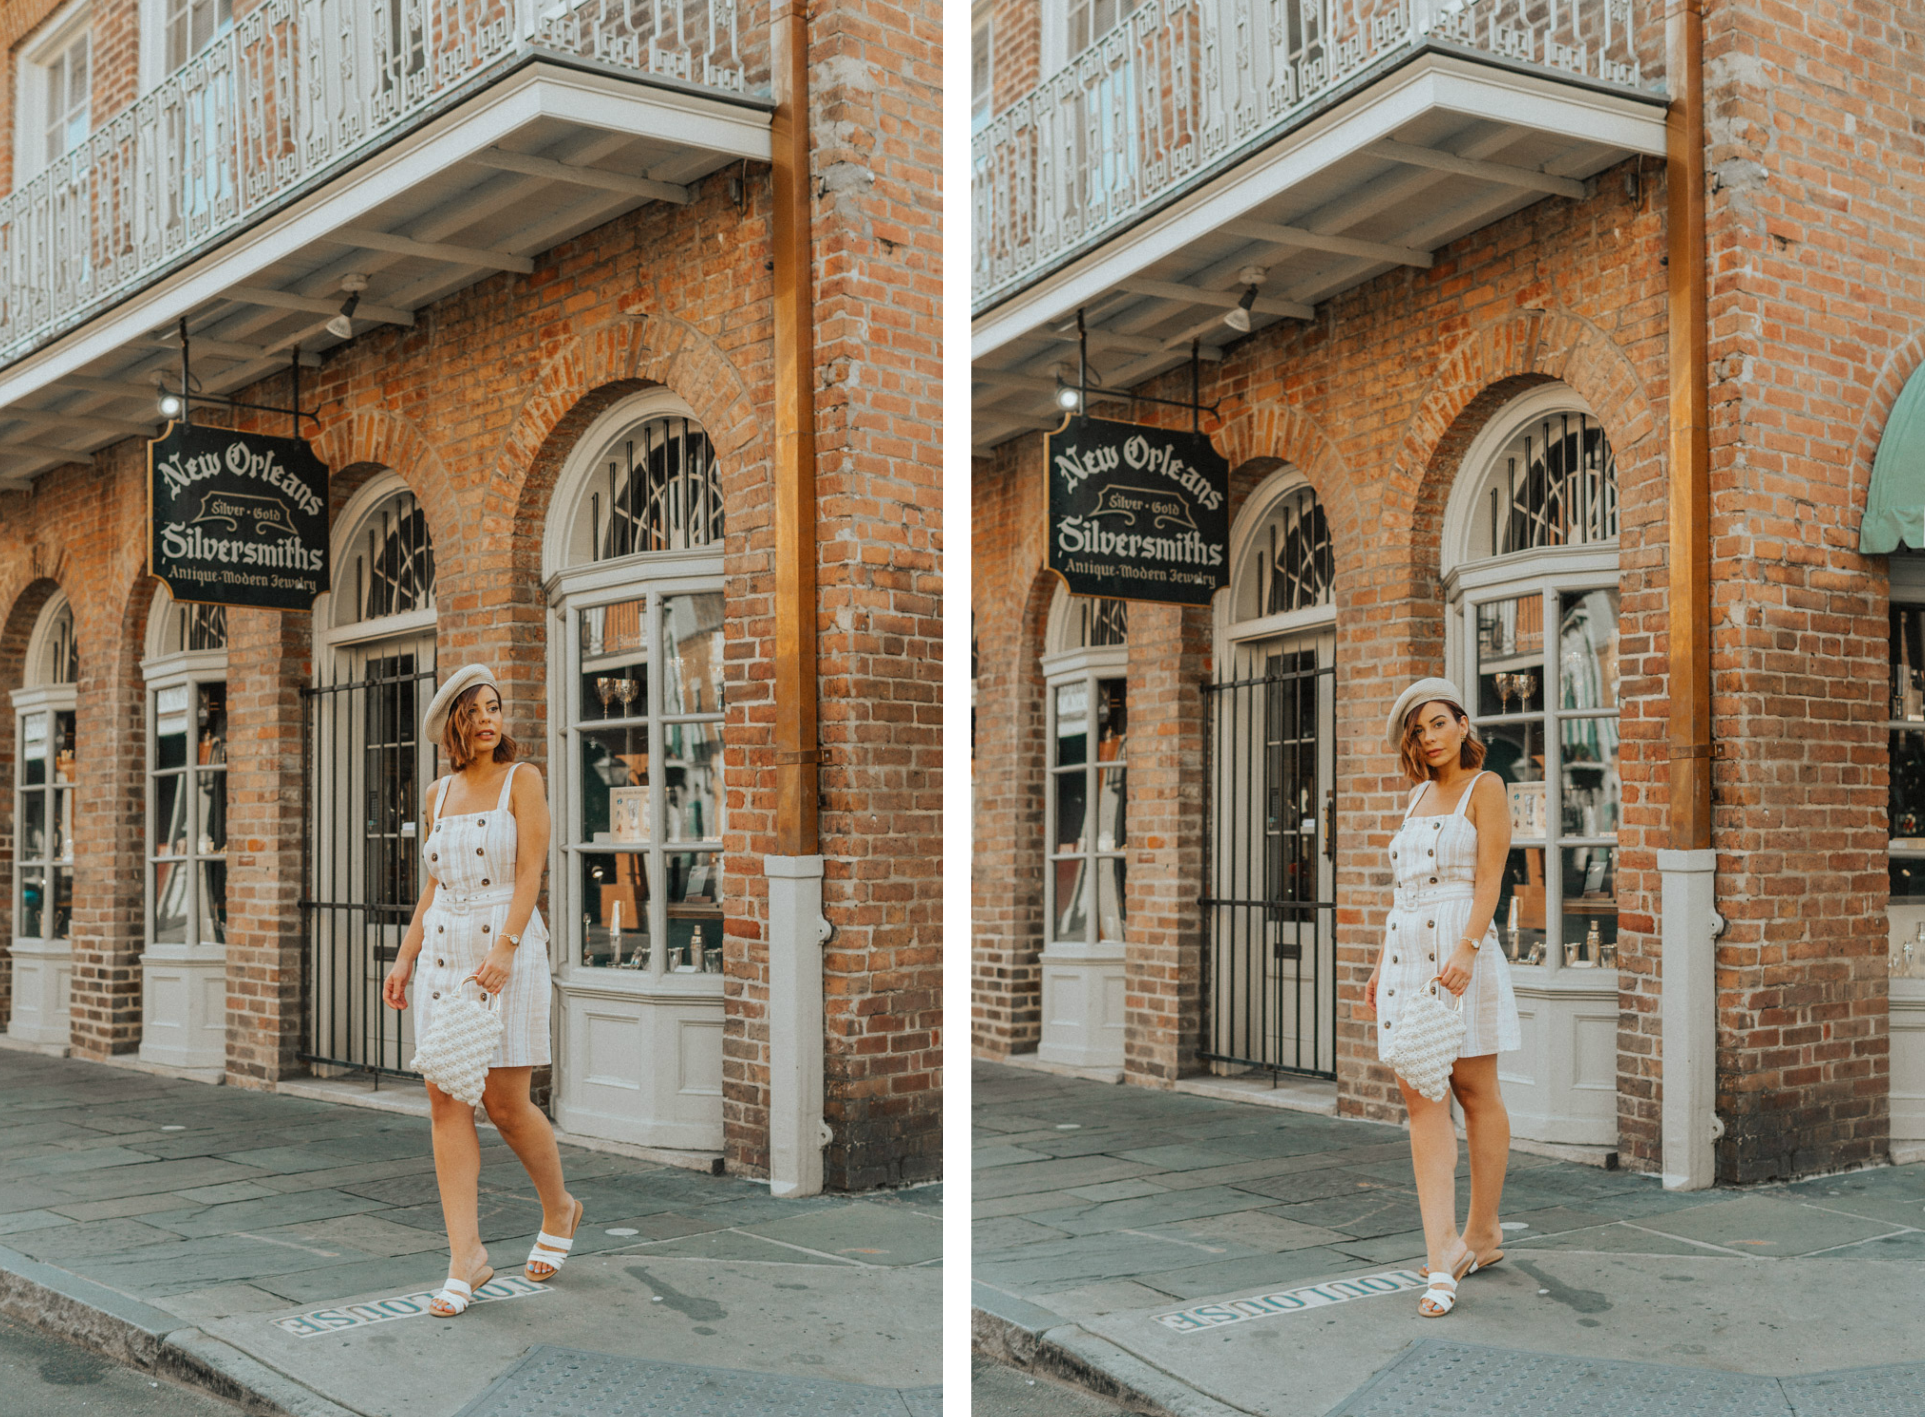 new orleans brunch outfit | new orleans outfit jazz | new orleans outfit summer black women plus size |new orleans outfit summer vacation | new orleans outfit summer street style | new orleans outfit summer men | new orleans outfit summer bachelorette party